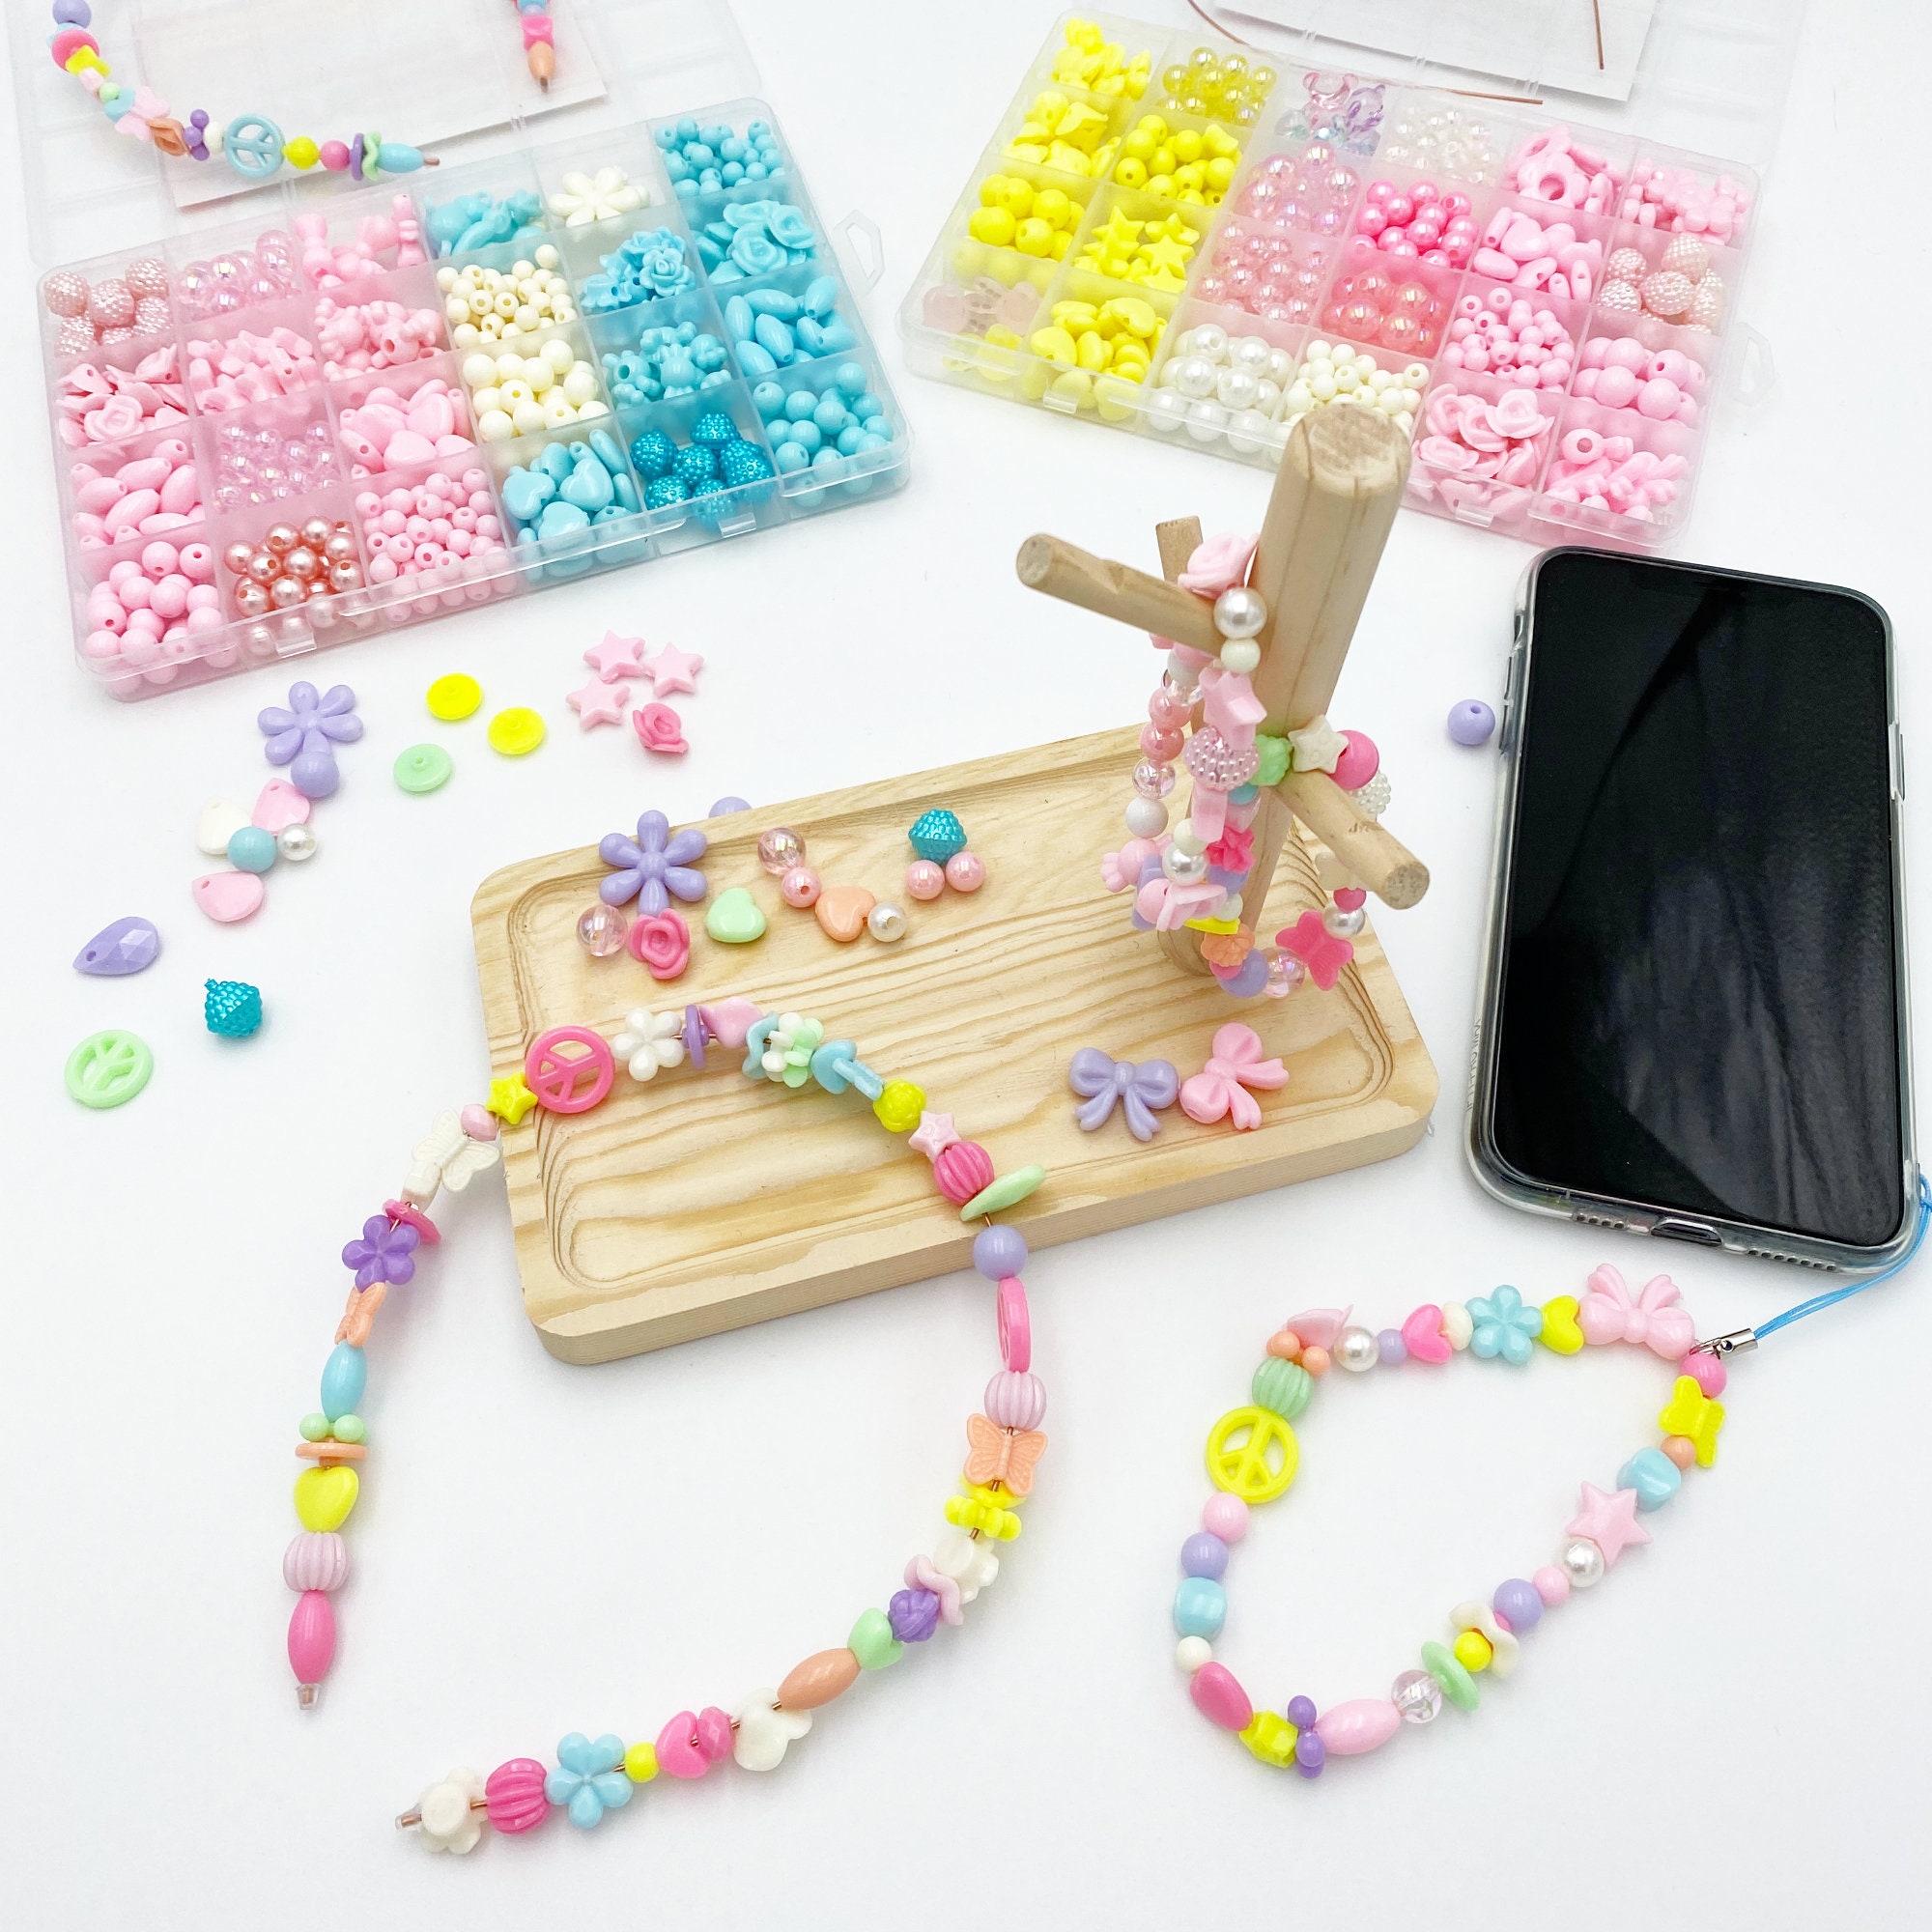 Jewellerry Making Kit Teens Girls Adults 1220 Pieces of Jewelry Boho Beads Necklace  Bracelet Earrings DIY Hobby Kit Gift Set 